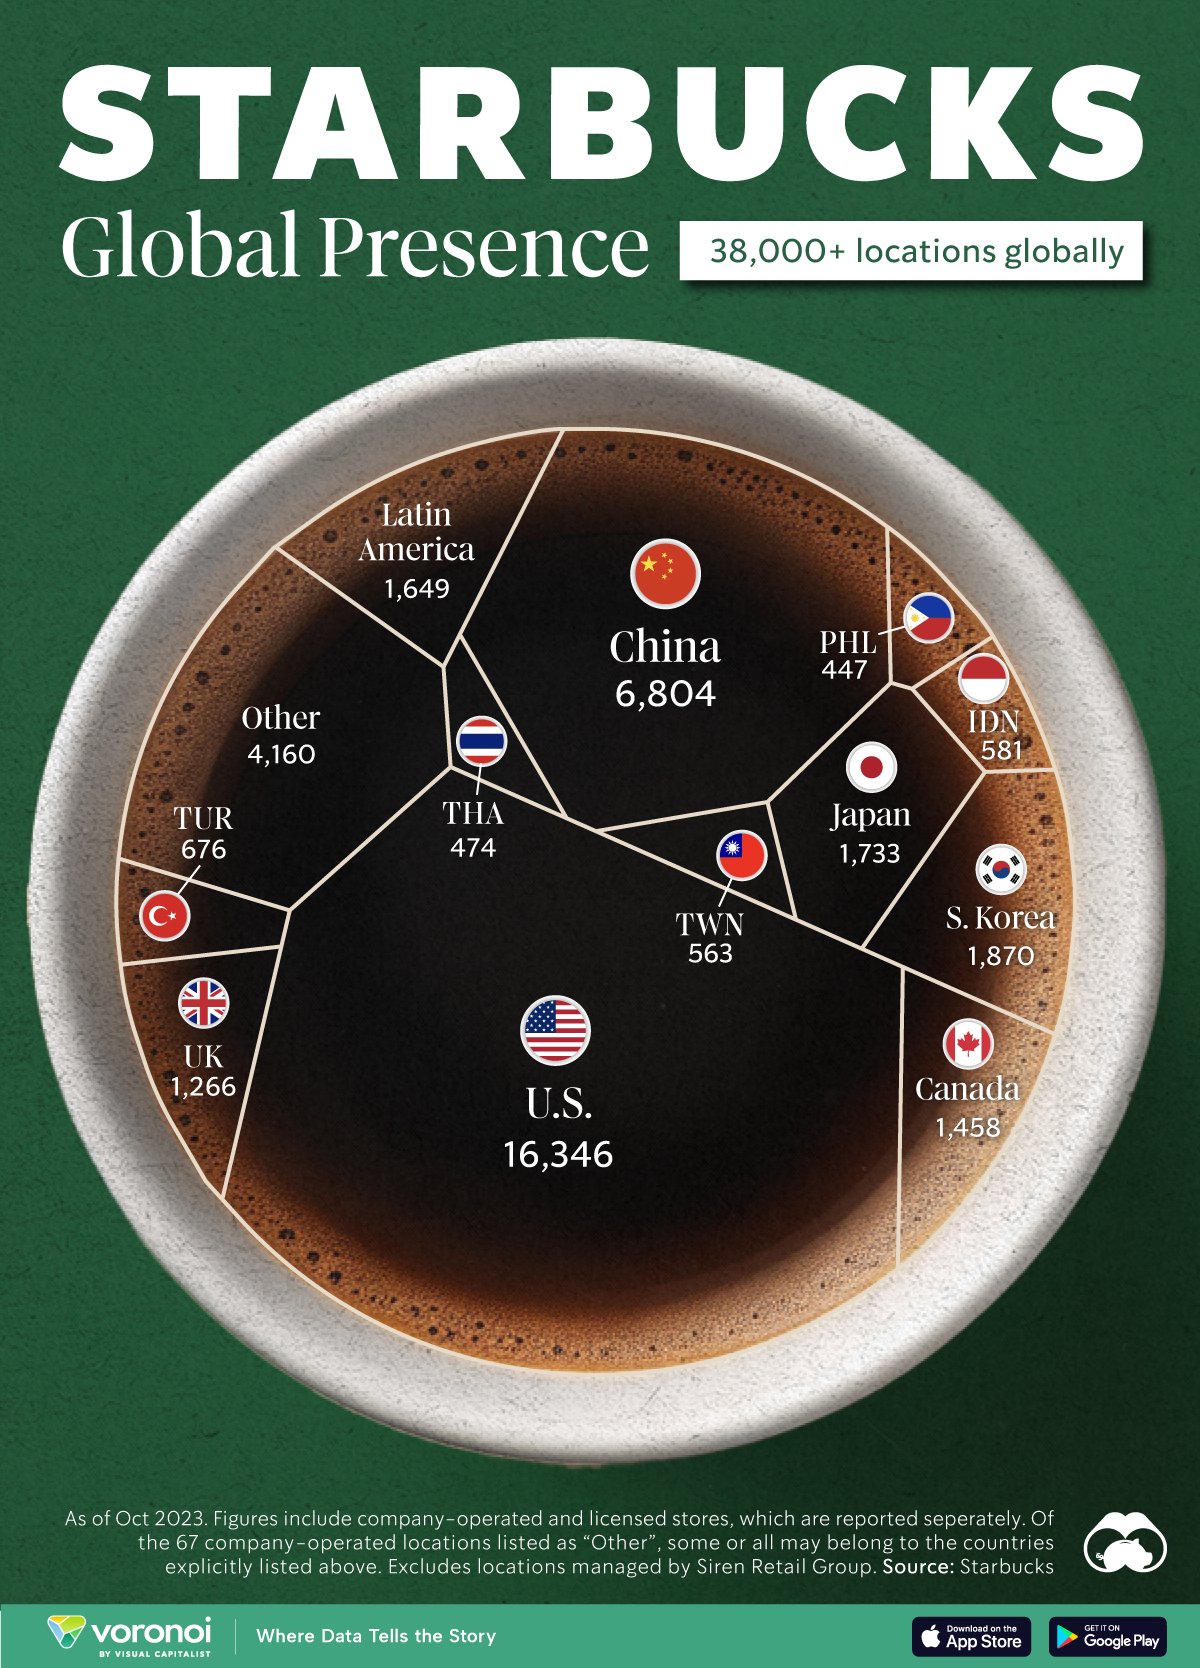 What country sells the most Starbucks?